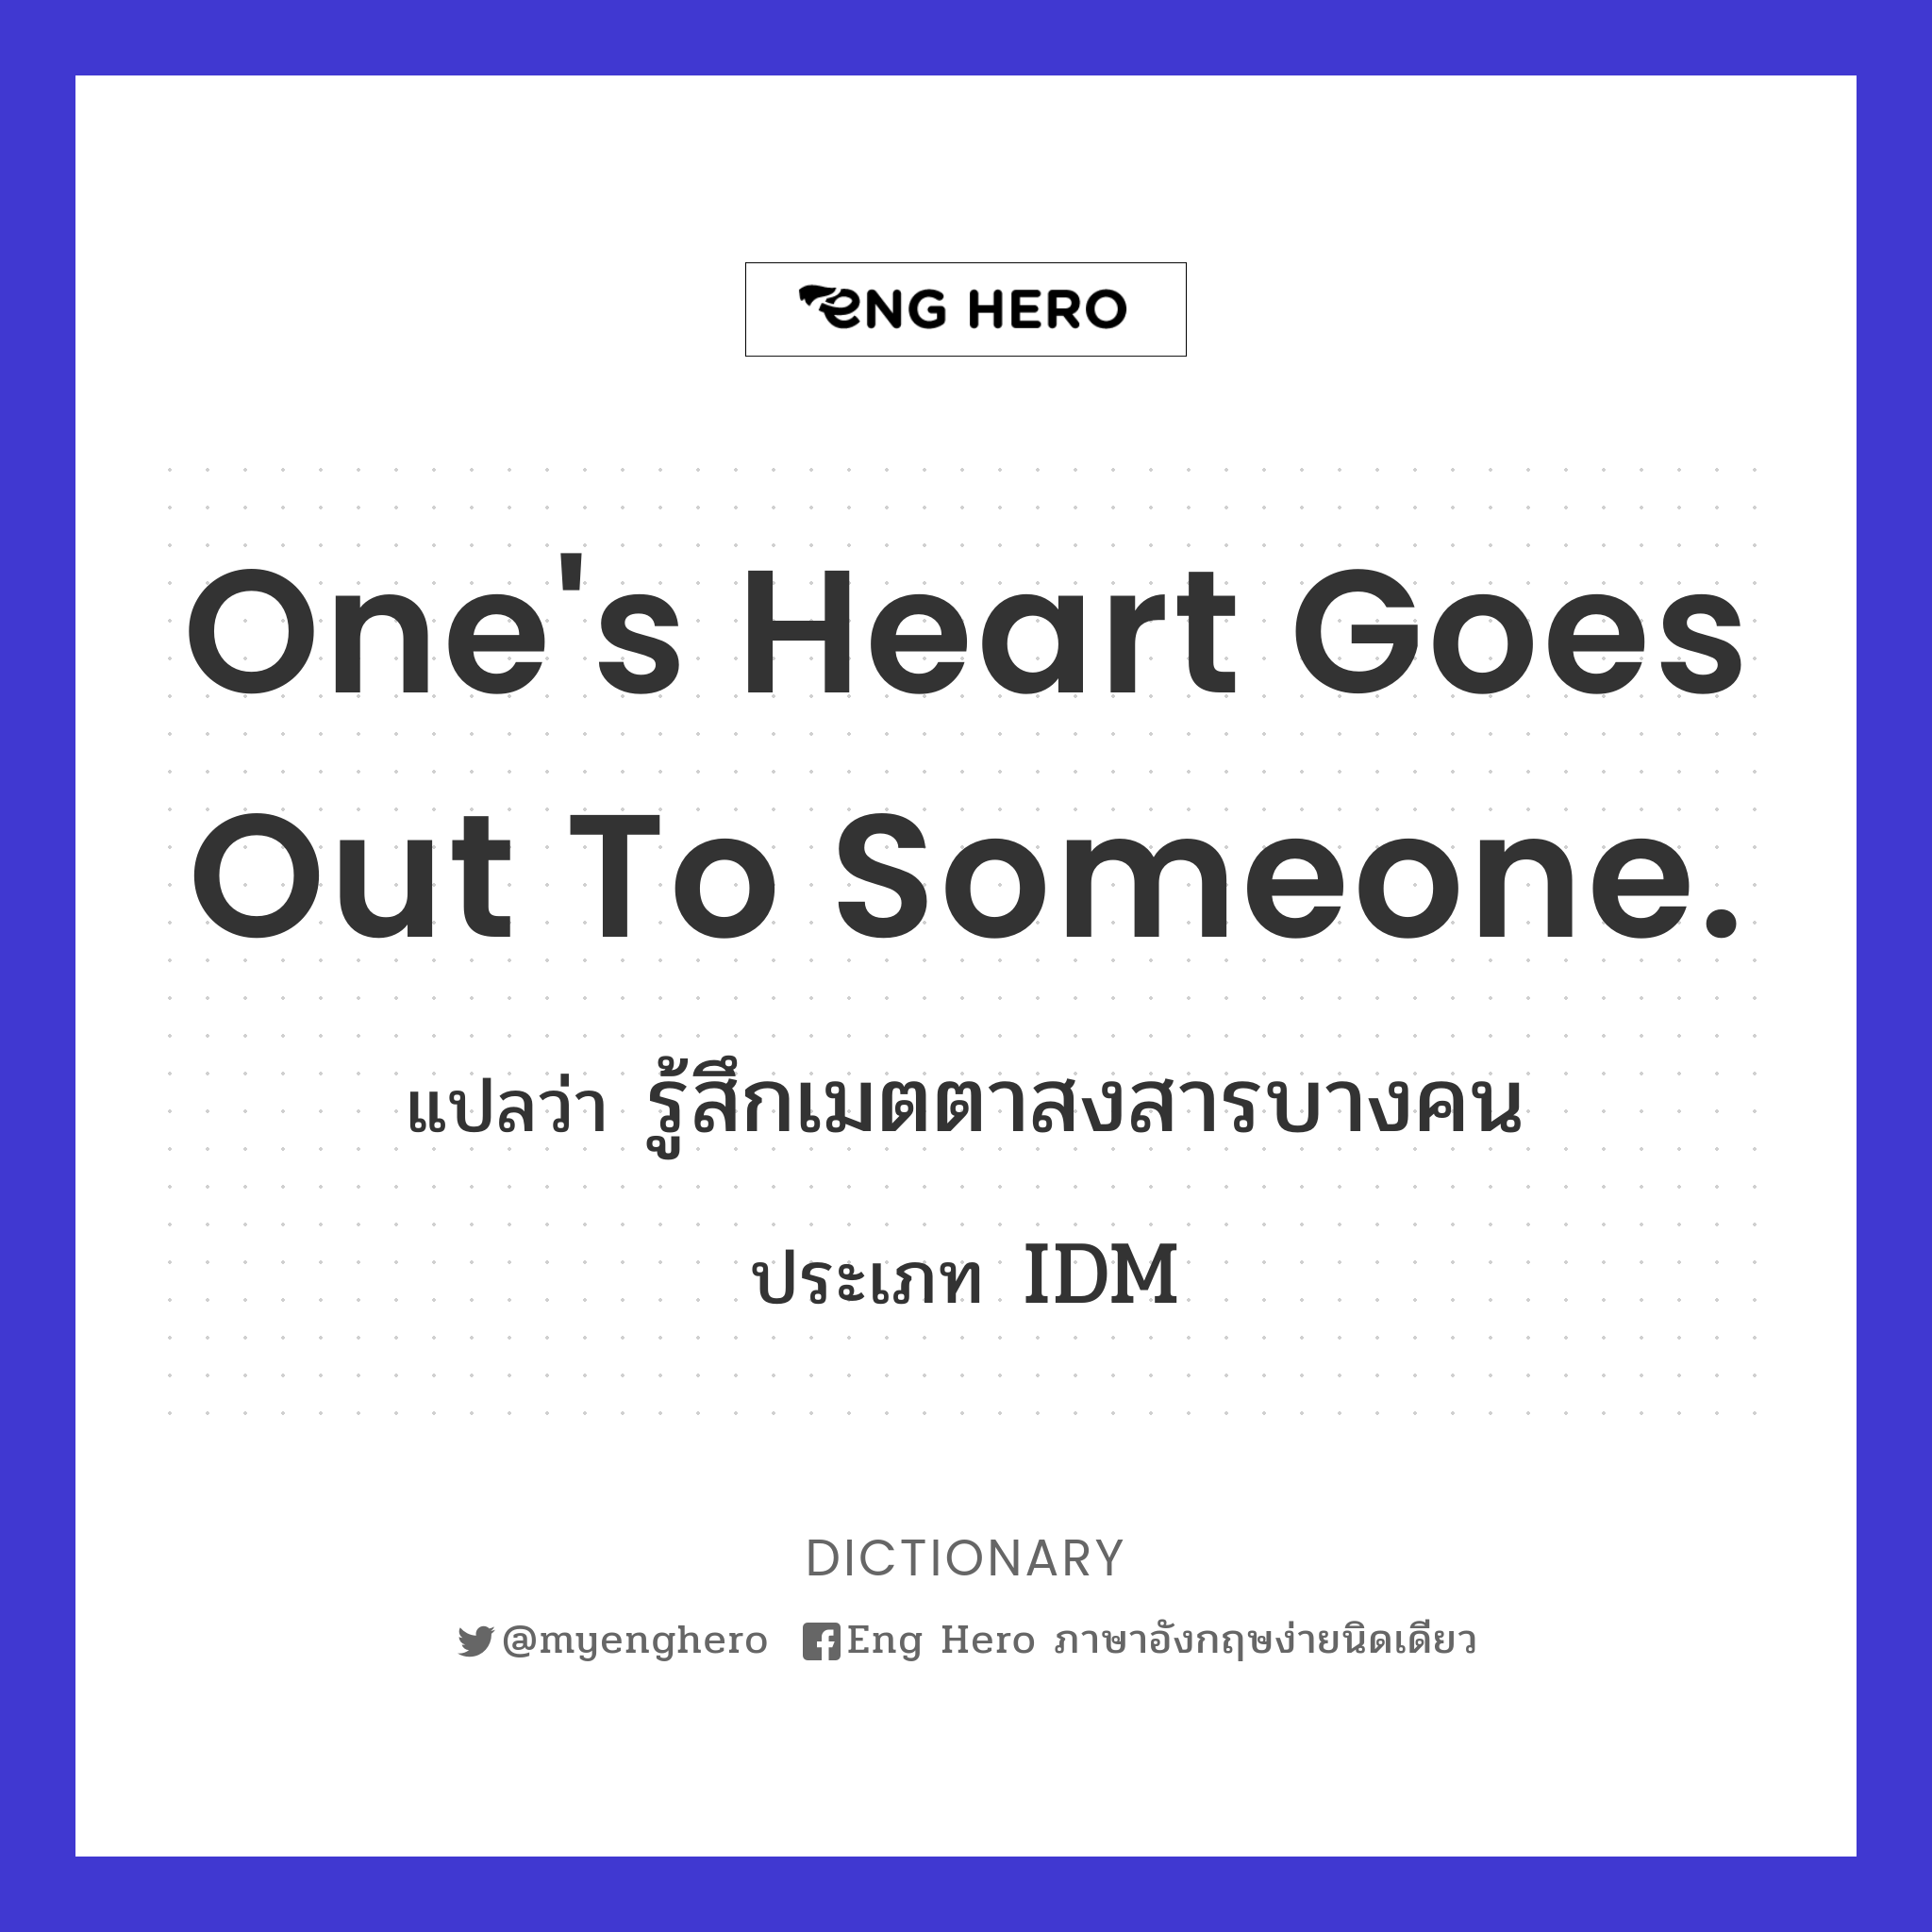 One's heart goes out to someone.